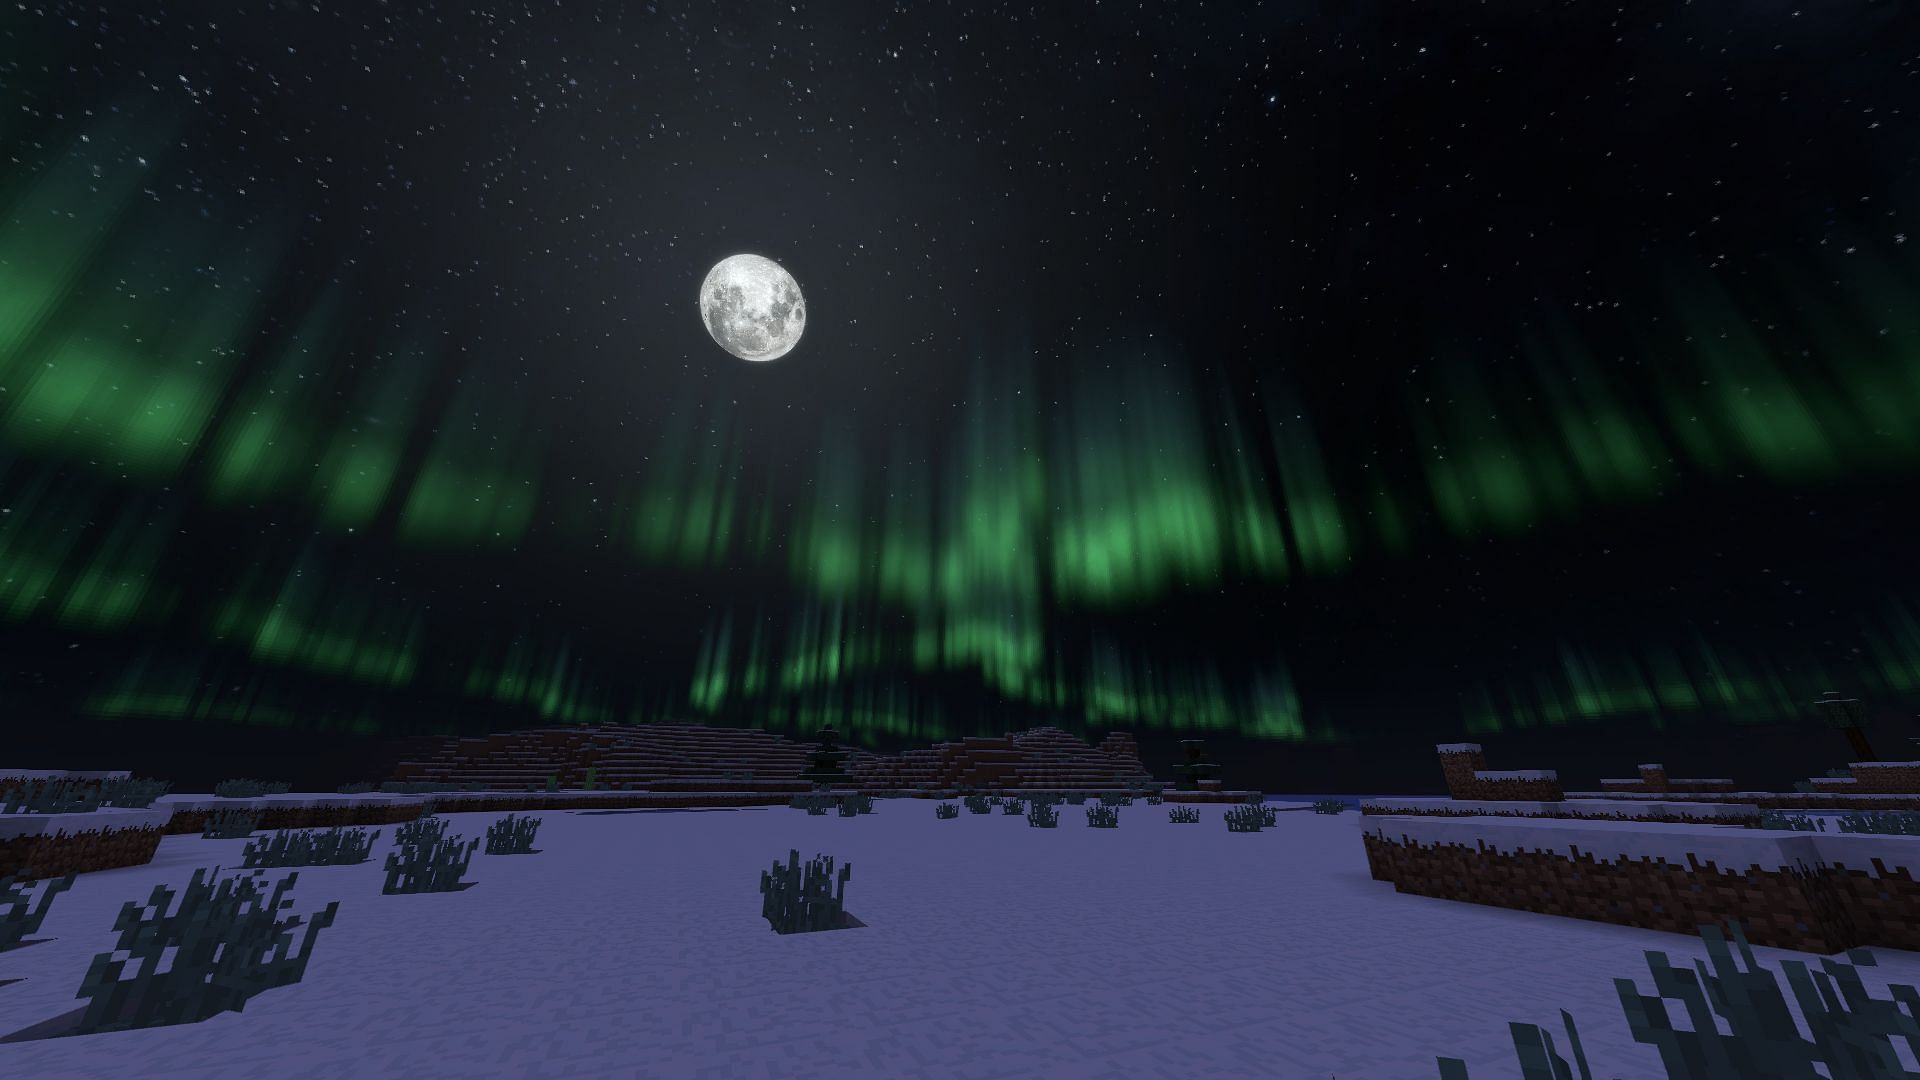 Hyper Realistic texture pack completely changes the sky in Minecraft (Image via CurseForge)